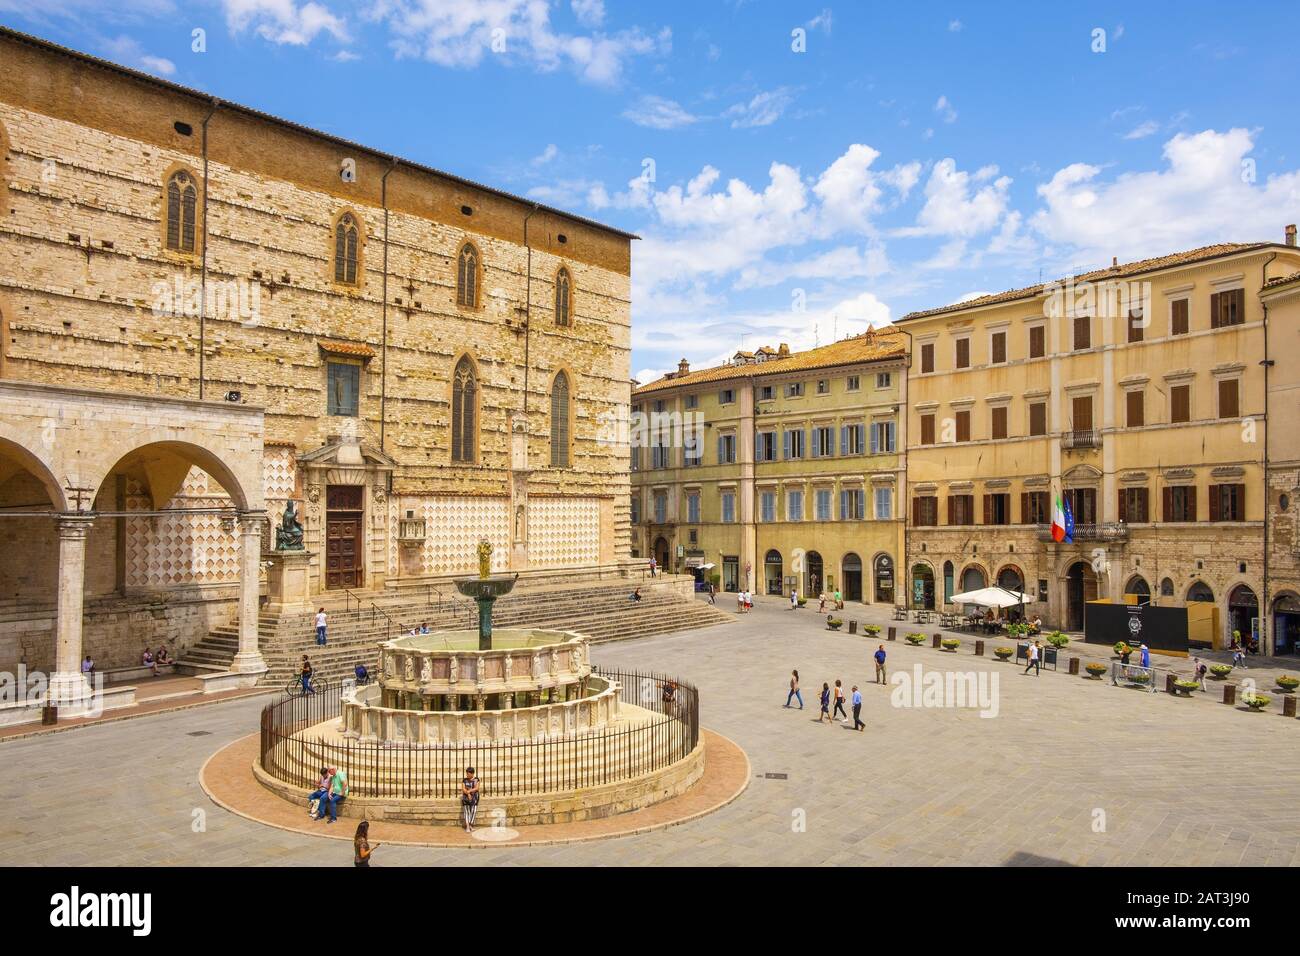 Perugia, Umbria / Italy - 2018/05/28: Panoramic view of the Piazza IV Novembre - Perugia historic quarter main square with XV century St. Lawrence Cathedral and Fontana Maggiore fountain Stock Photo